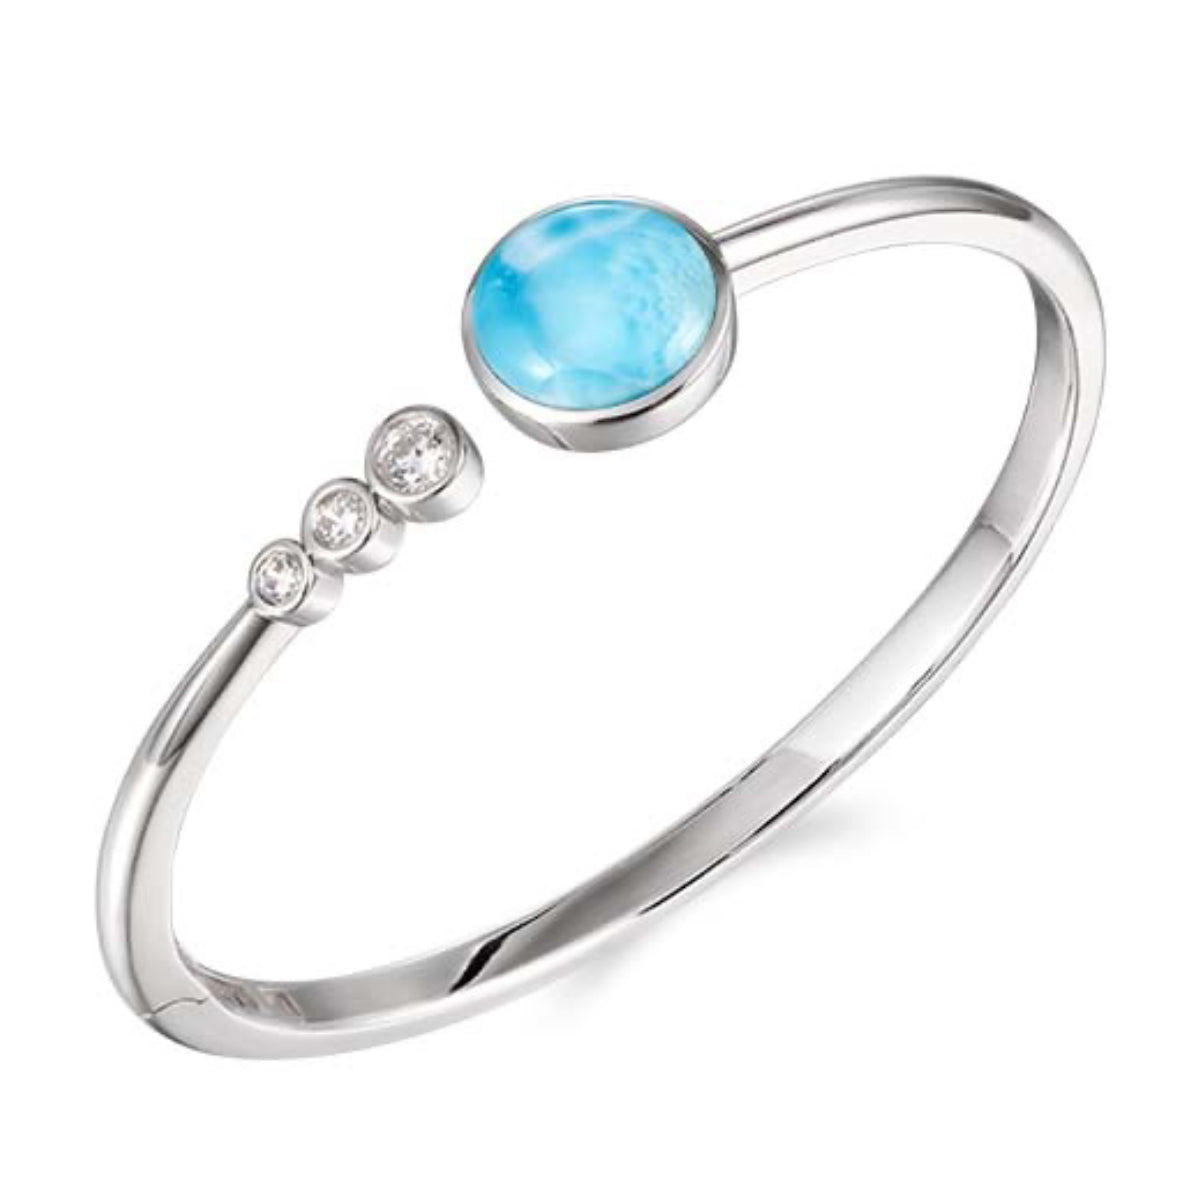 Alamea Larimar Bangle Bracelet in Sterling Silver with Cubic Zirconia